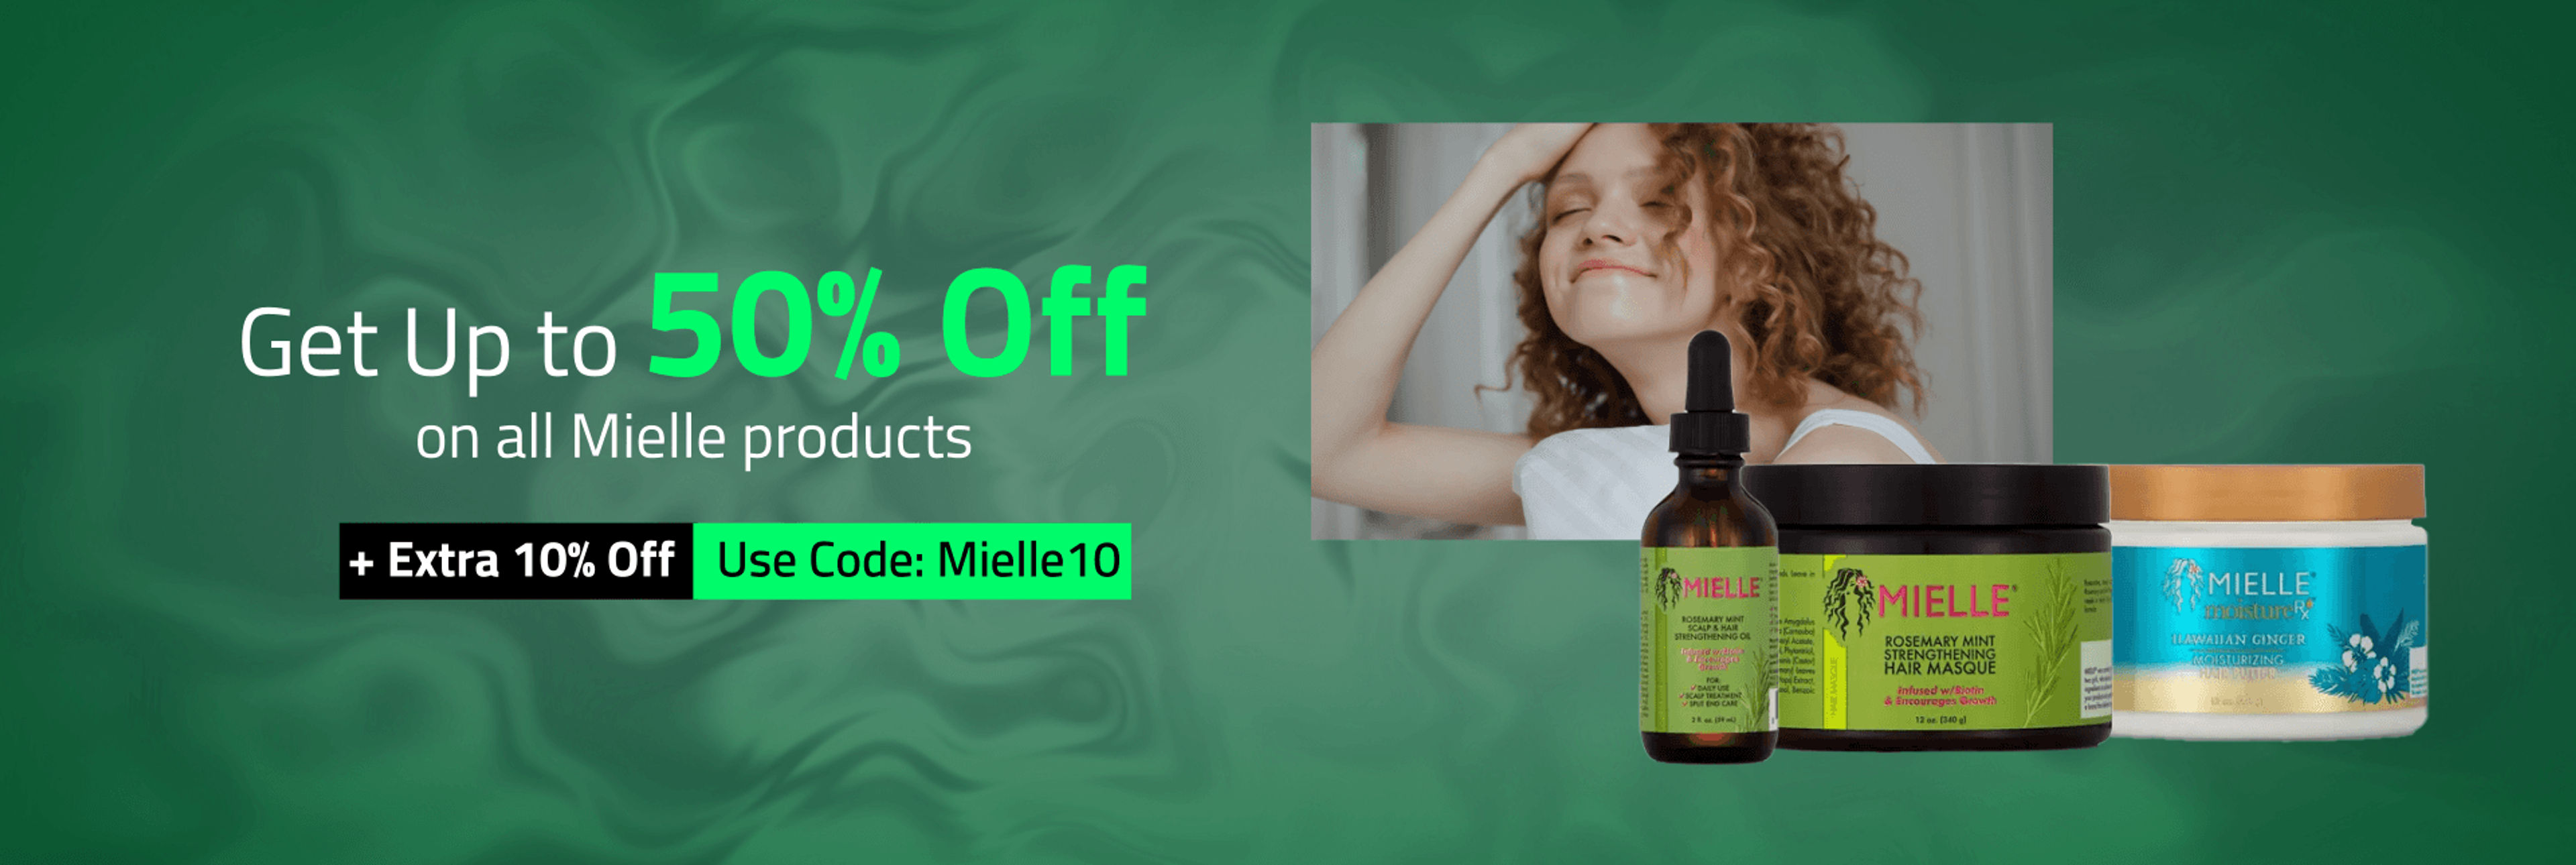 Get Up to 50% off on all keracare products + Extra 10% off by using code